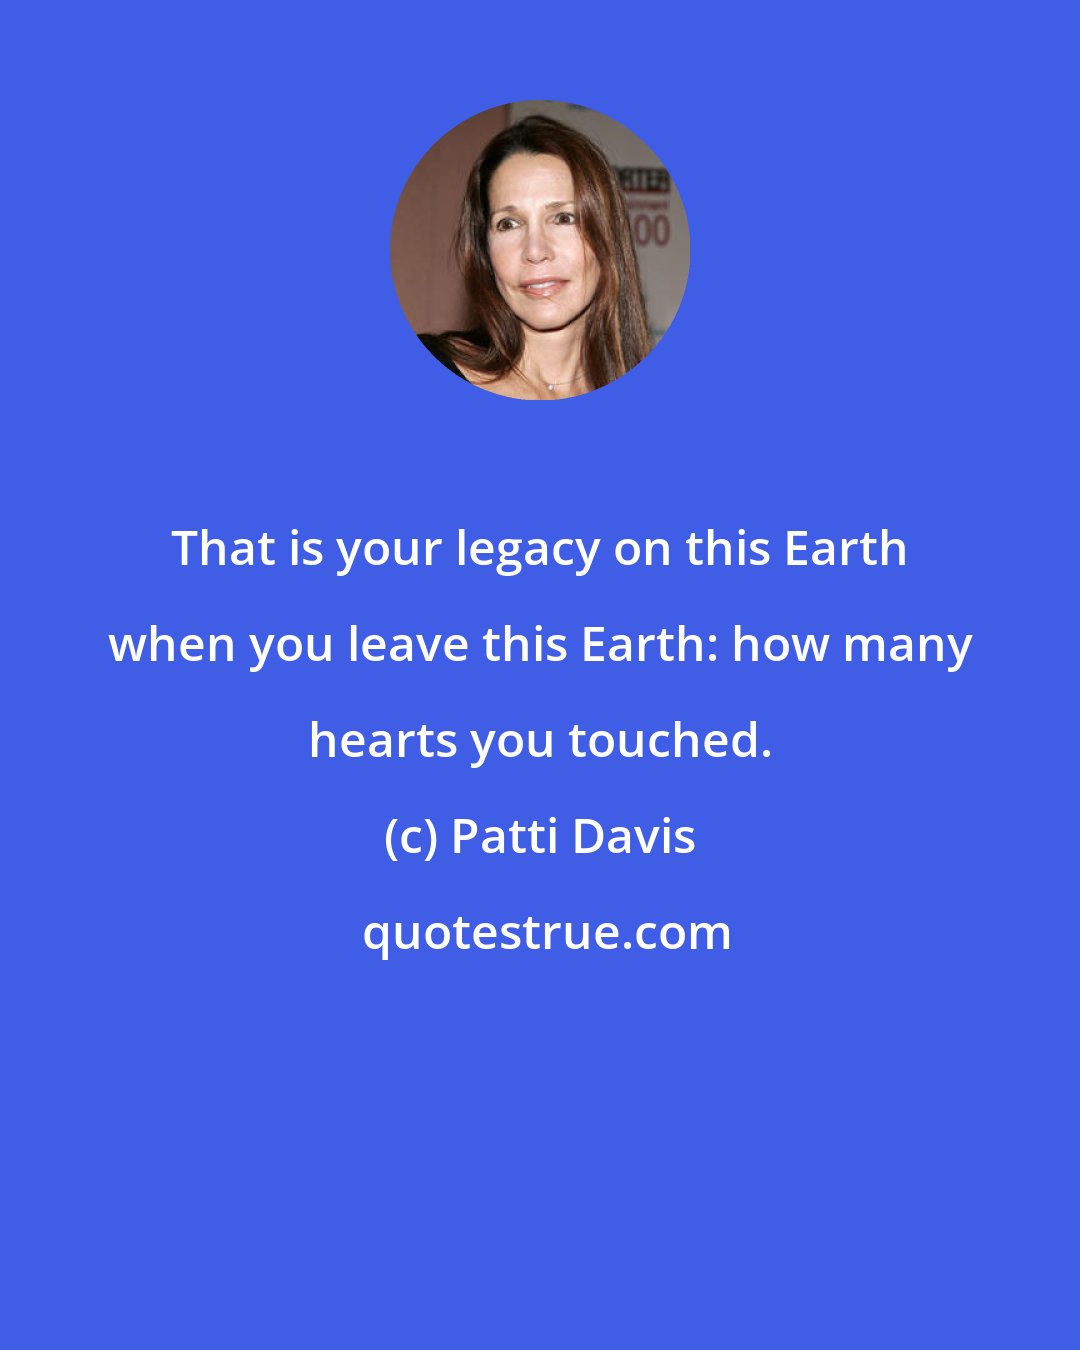 Patti Davis: That is your legacy on this Earth when you leave this Earth: how many hearts you touched.